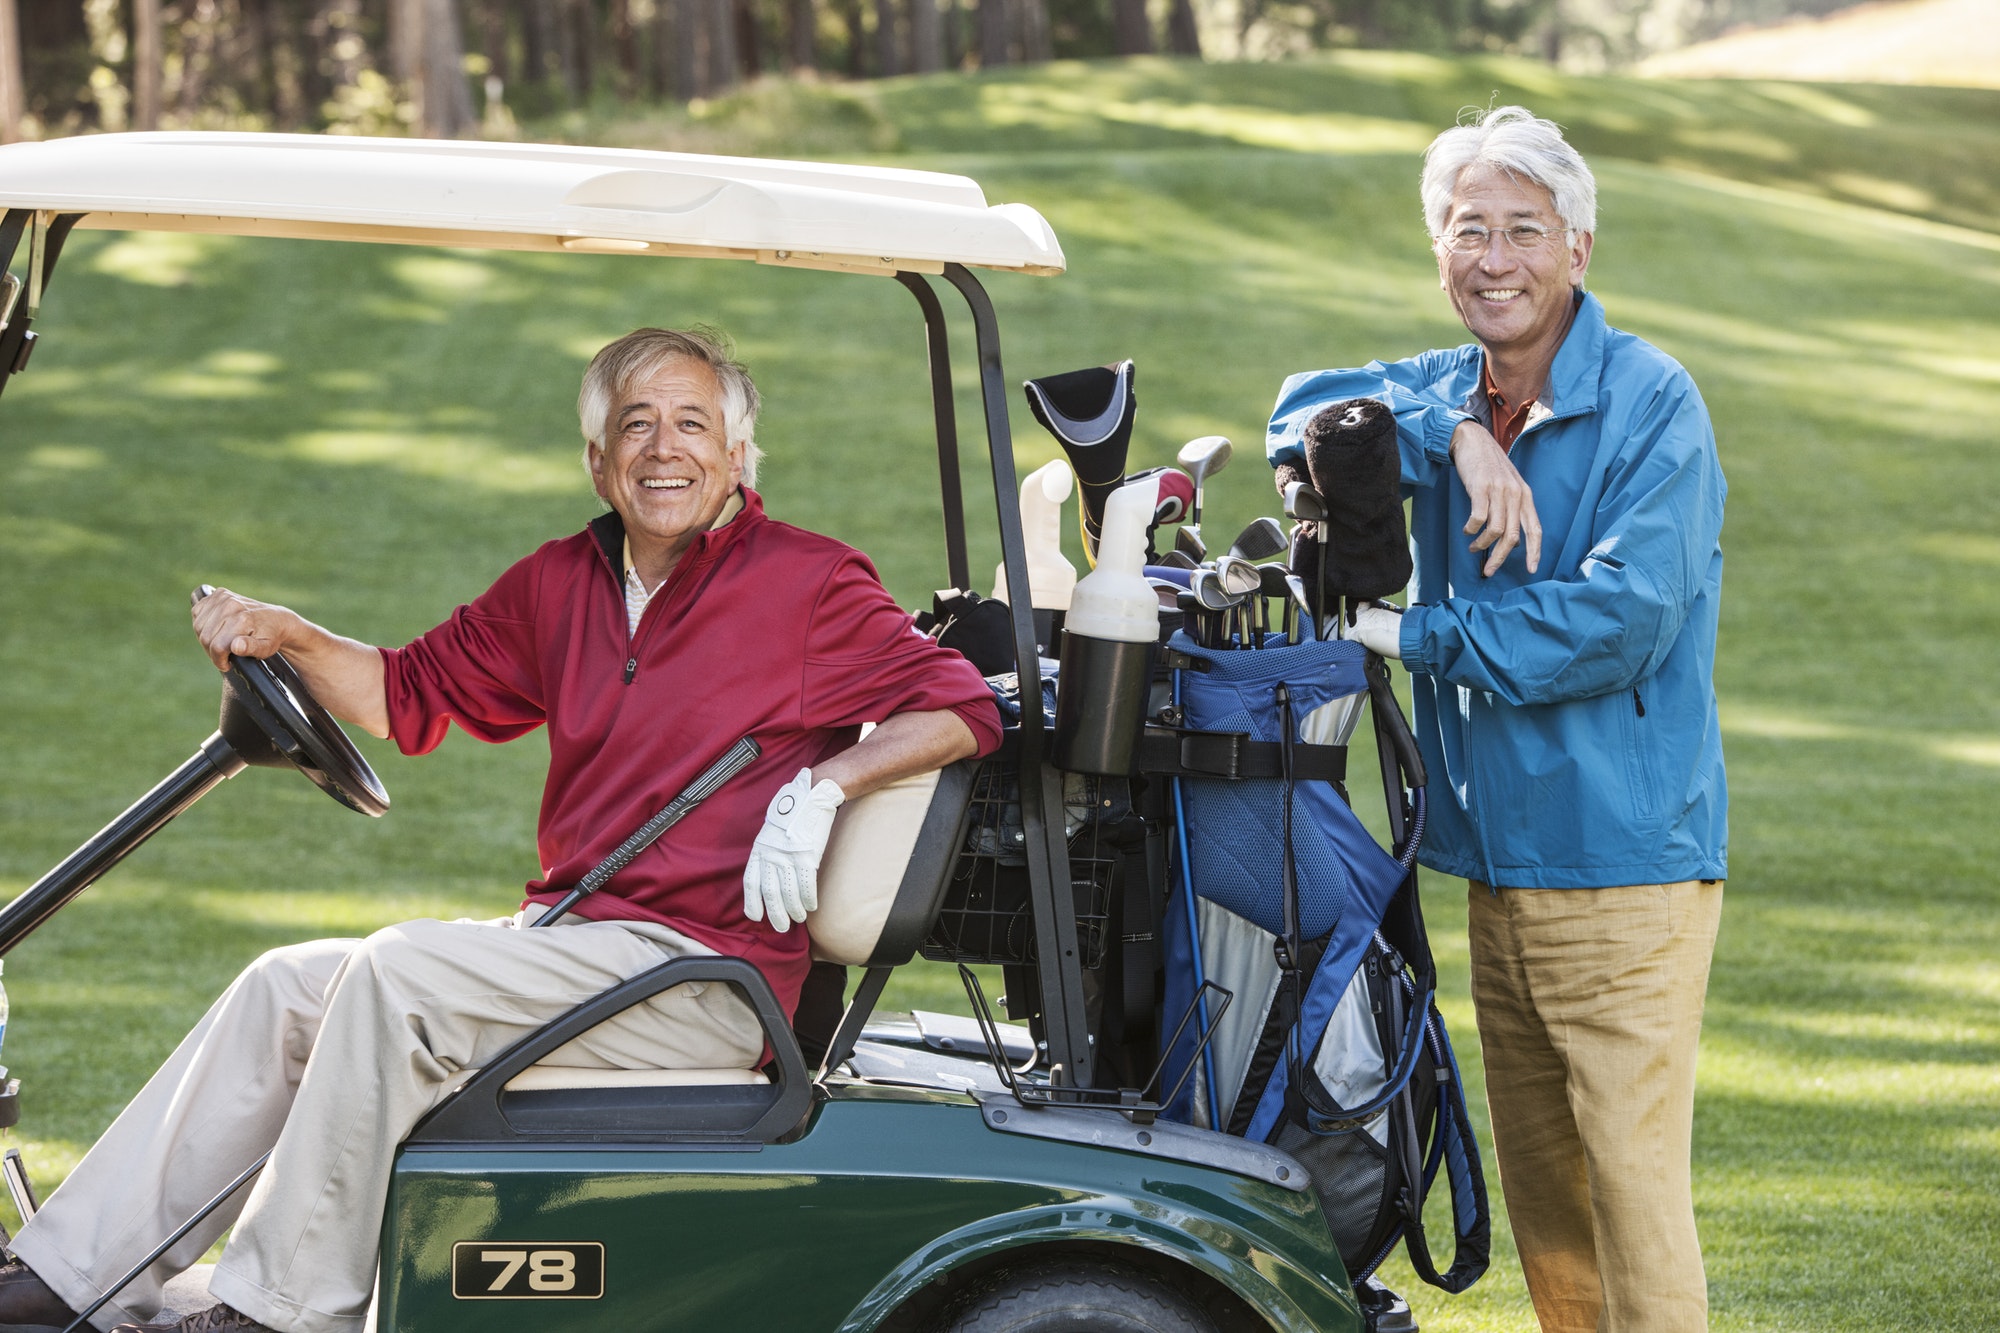 Two senior male golfing buddies and their golf cart and clubs.